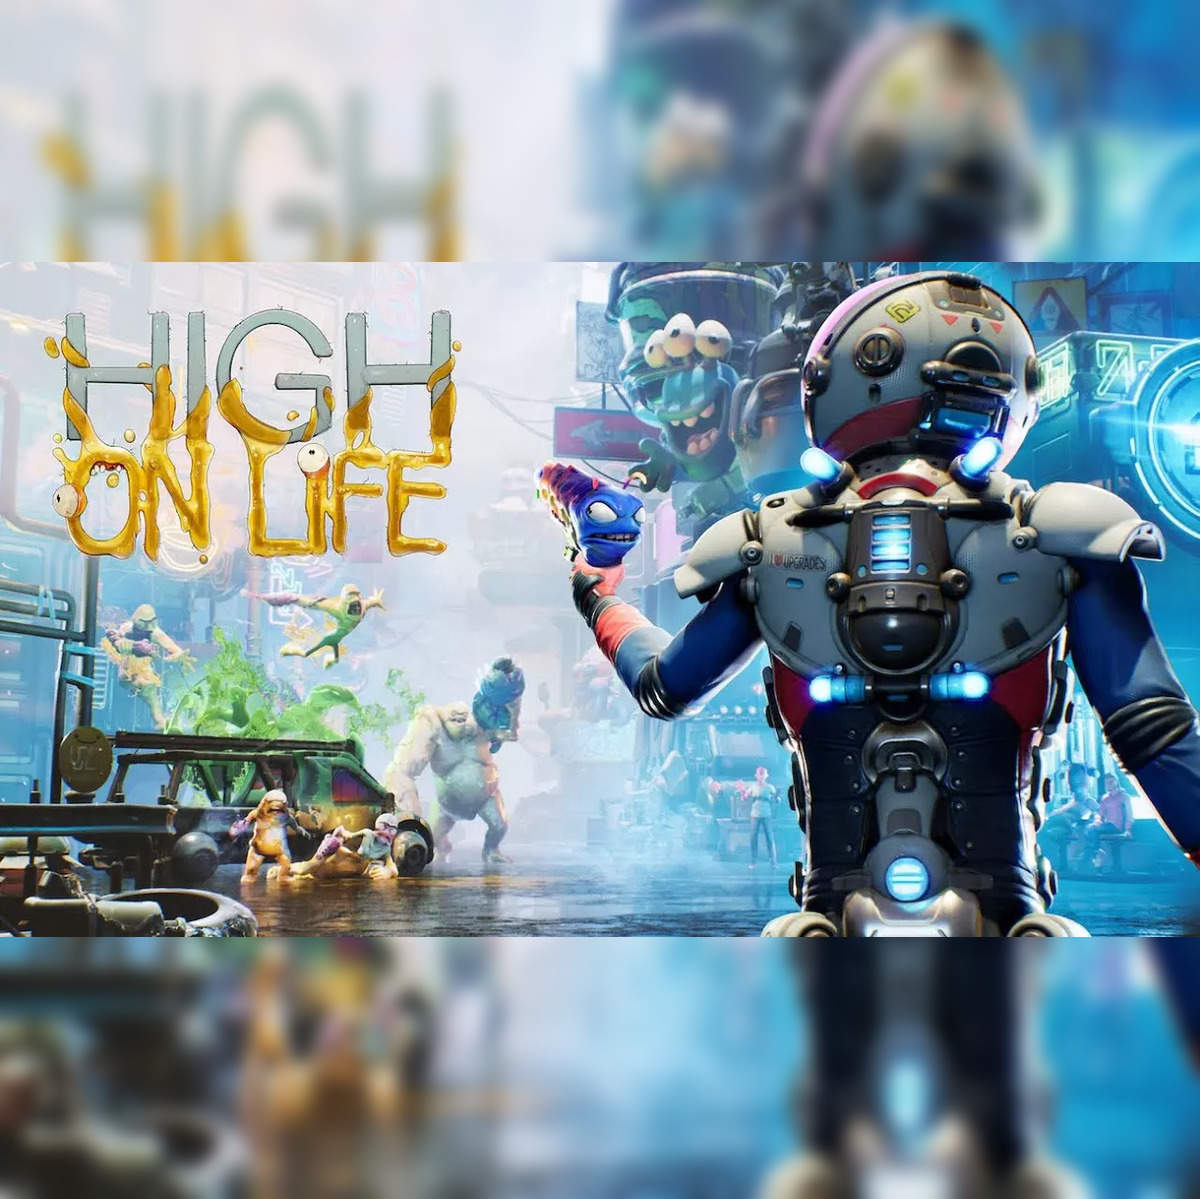 Is High On Life coming to PS5 and PS4